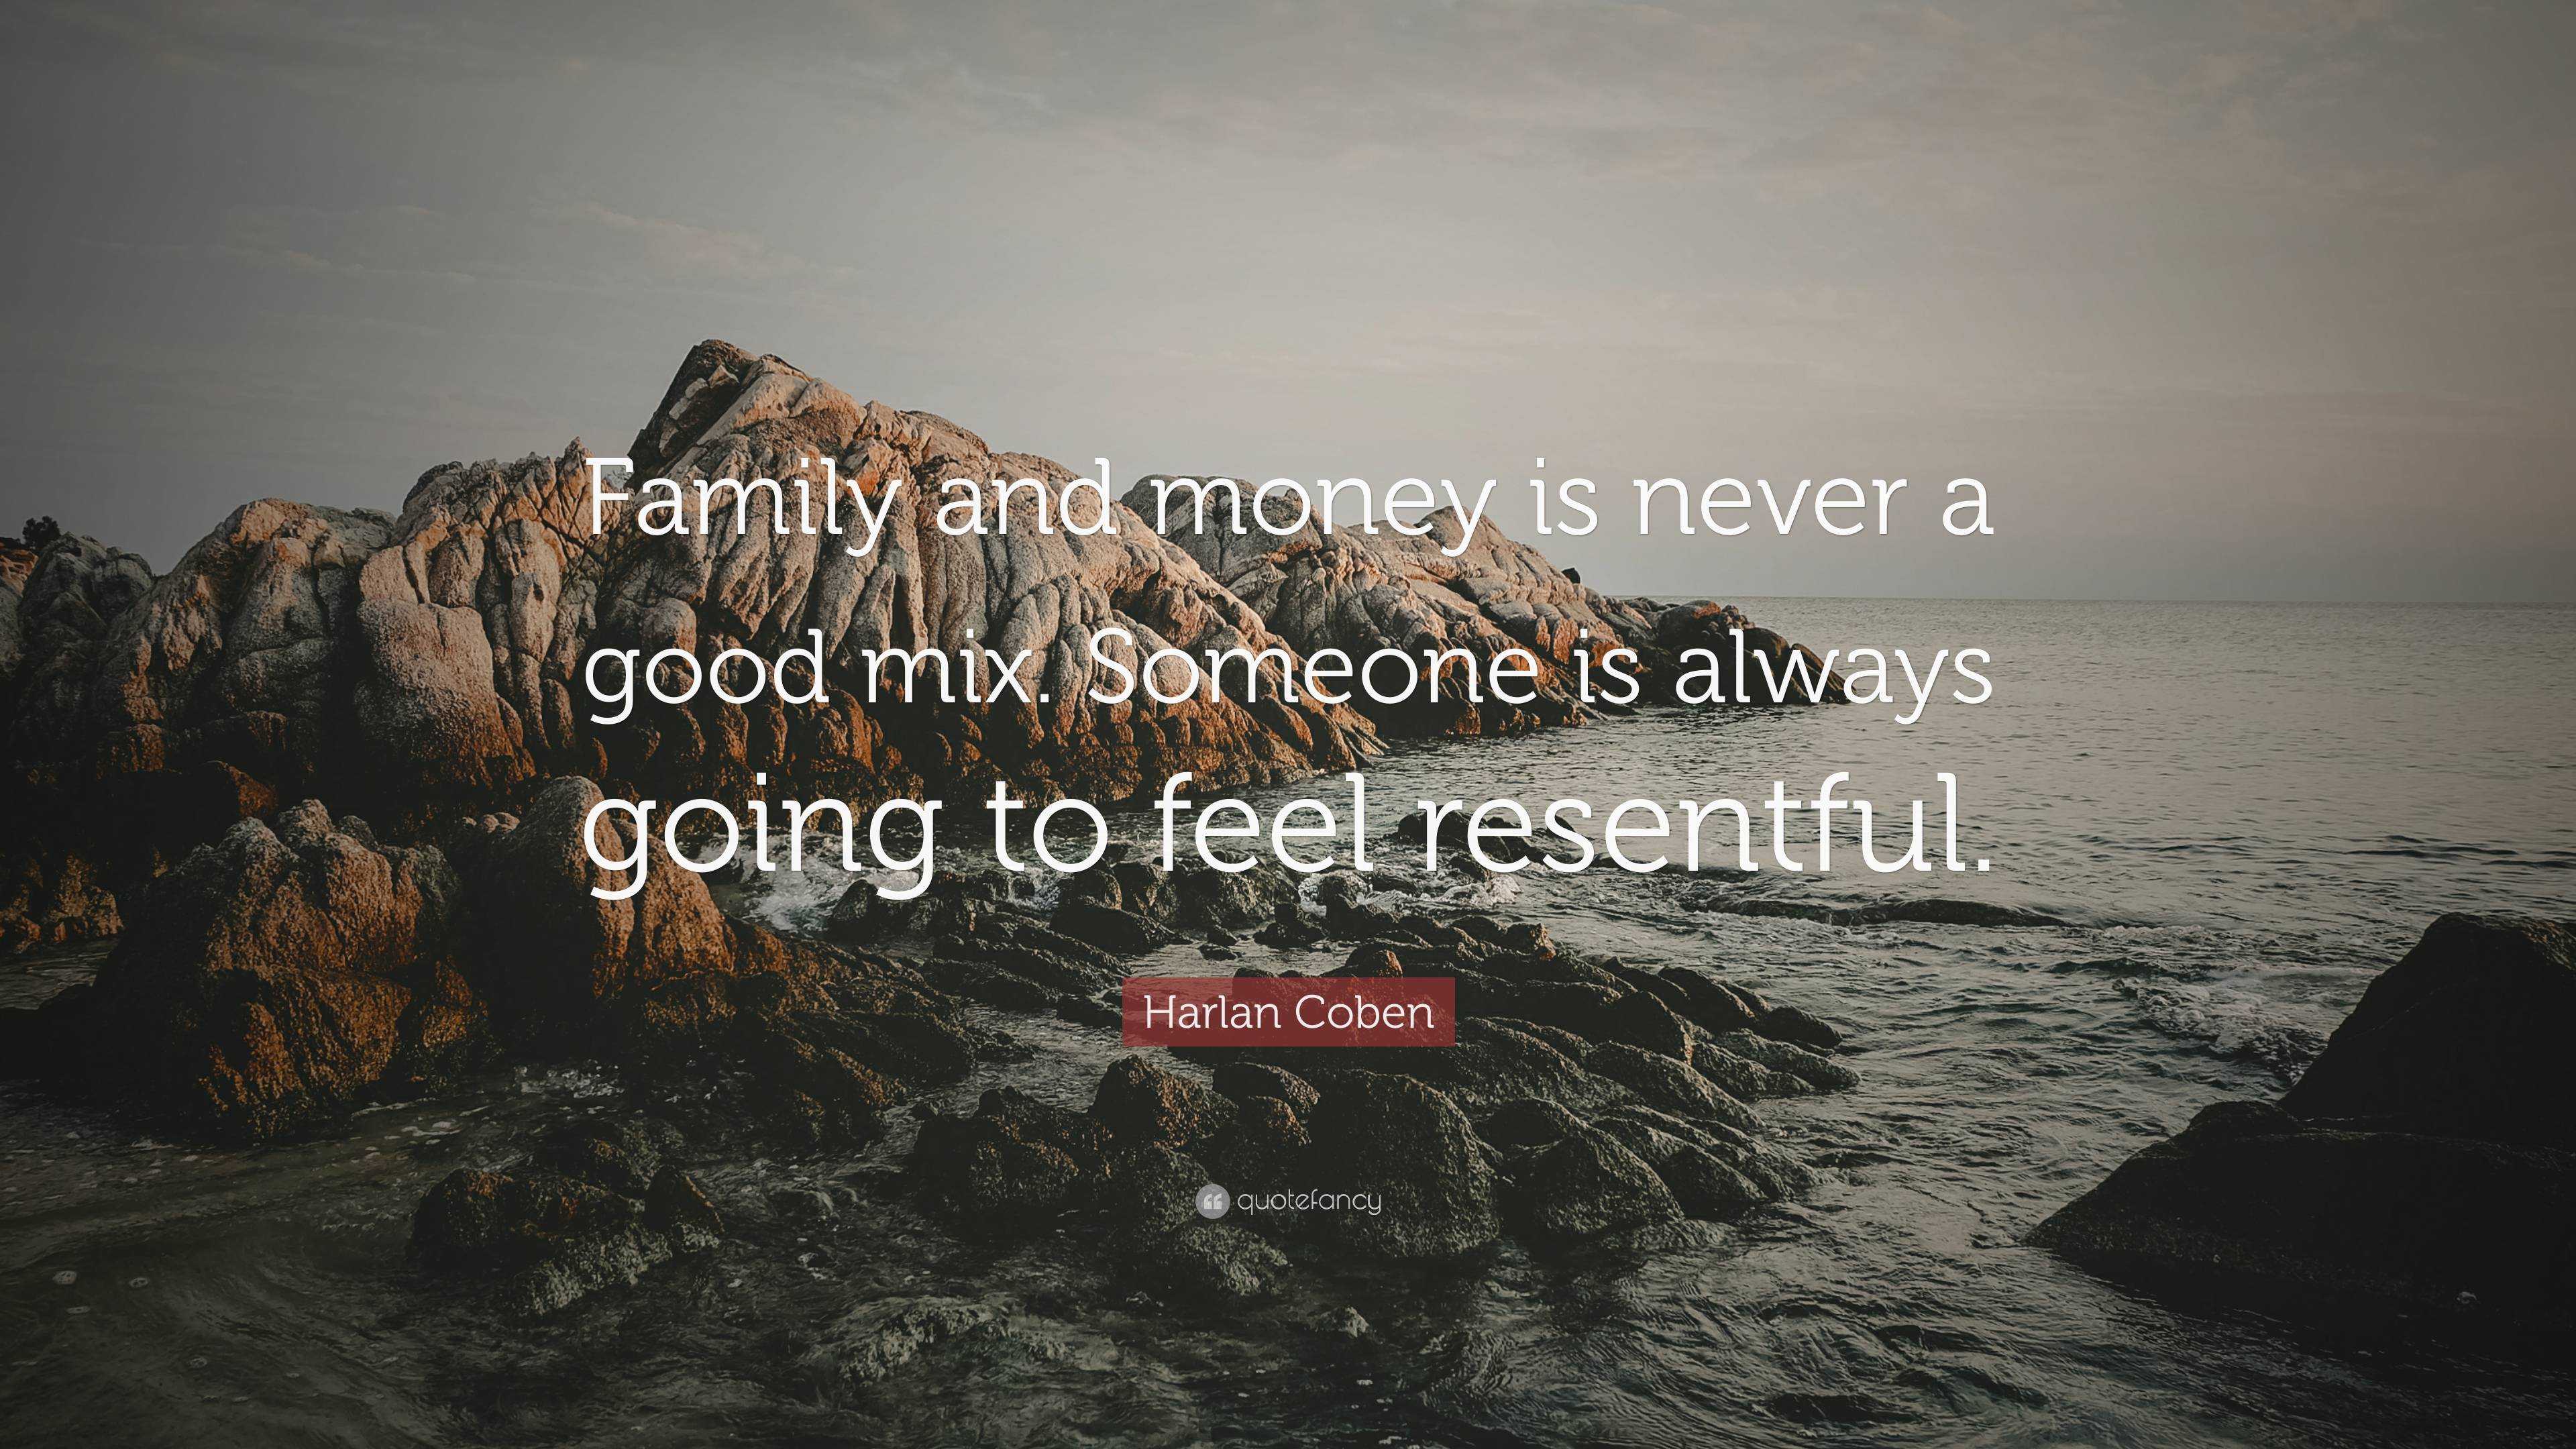 quotes about money and family